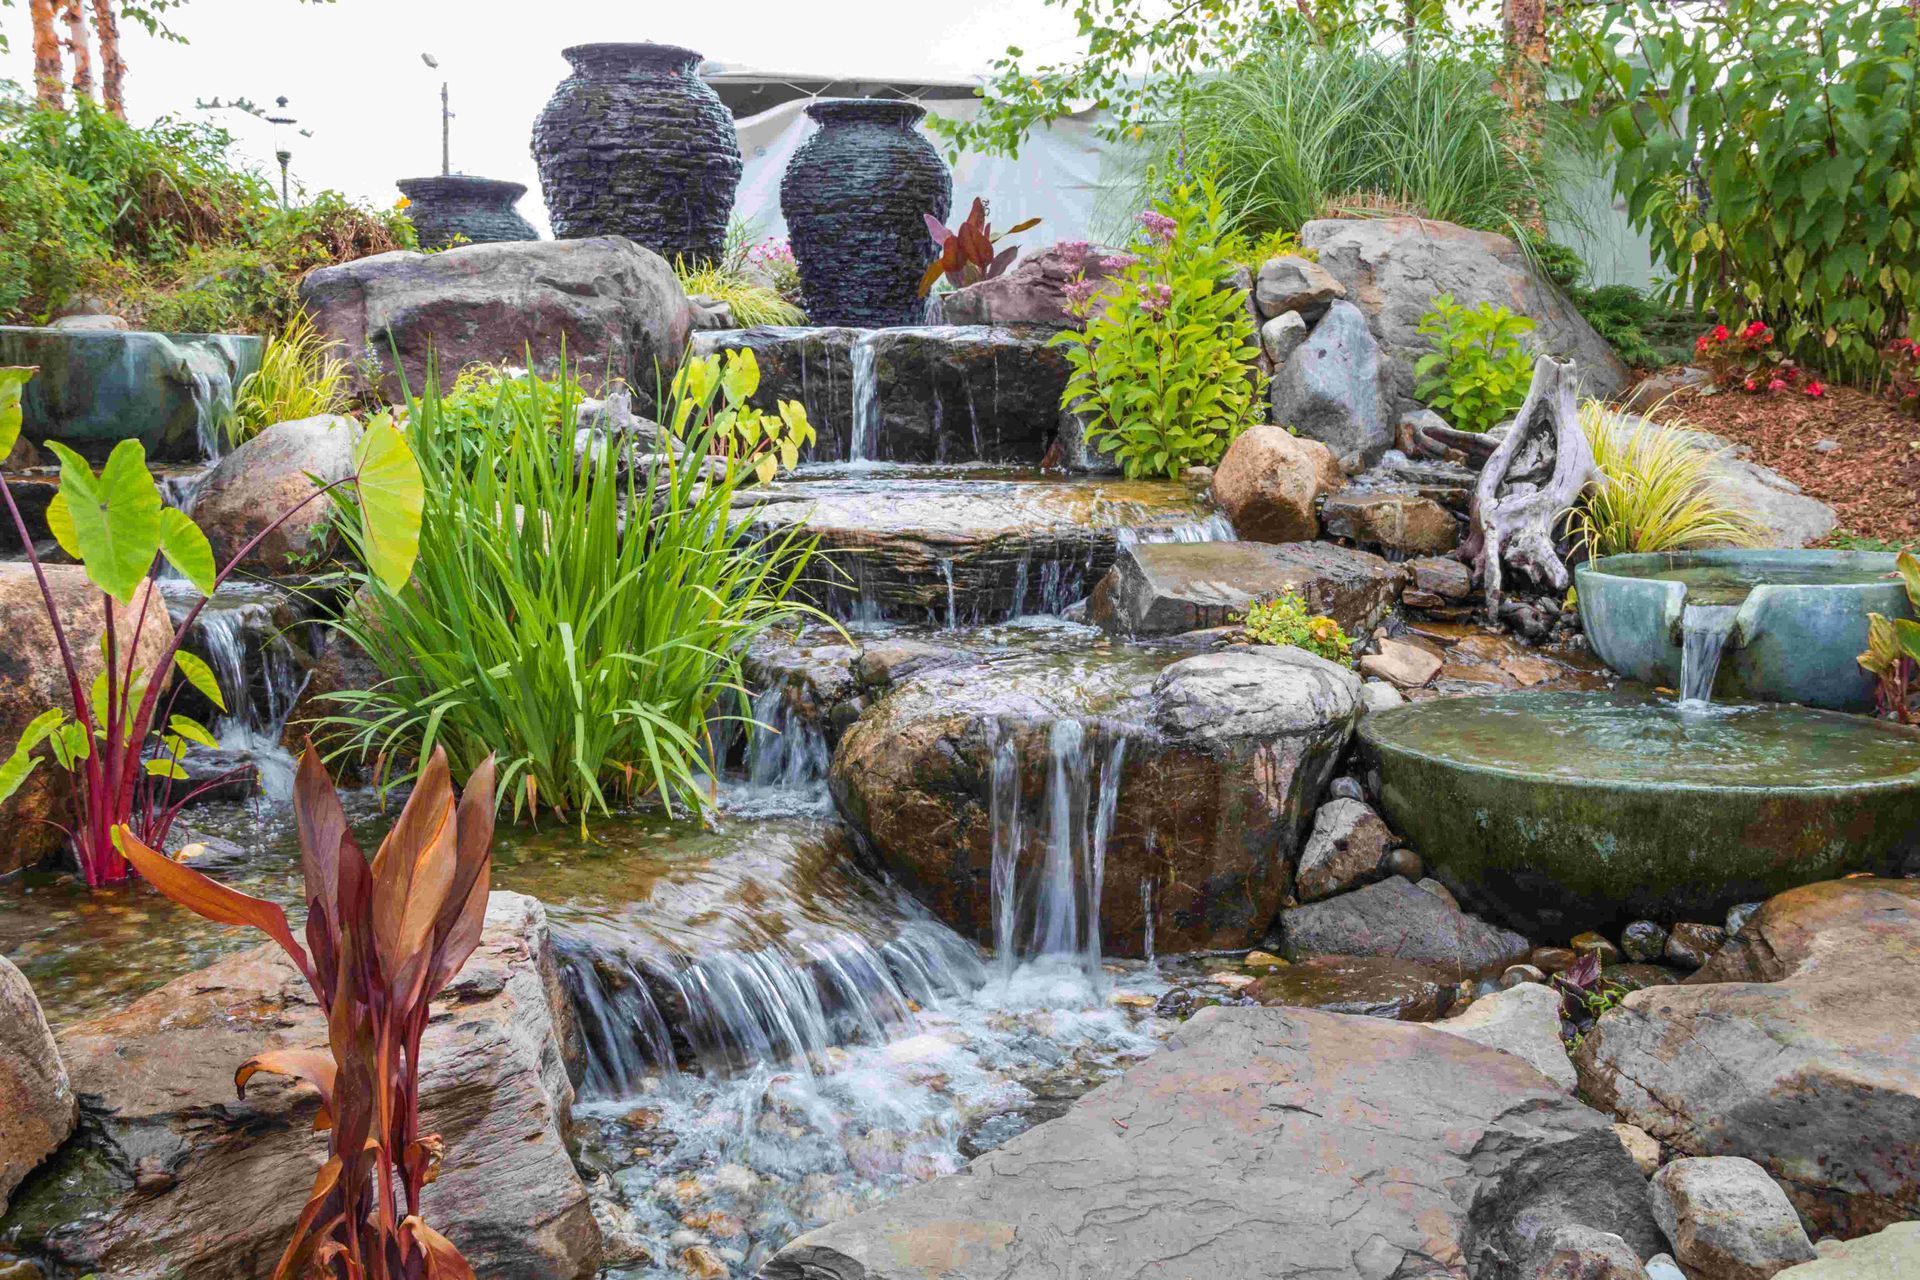 Water features outside in a person's yard